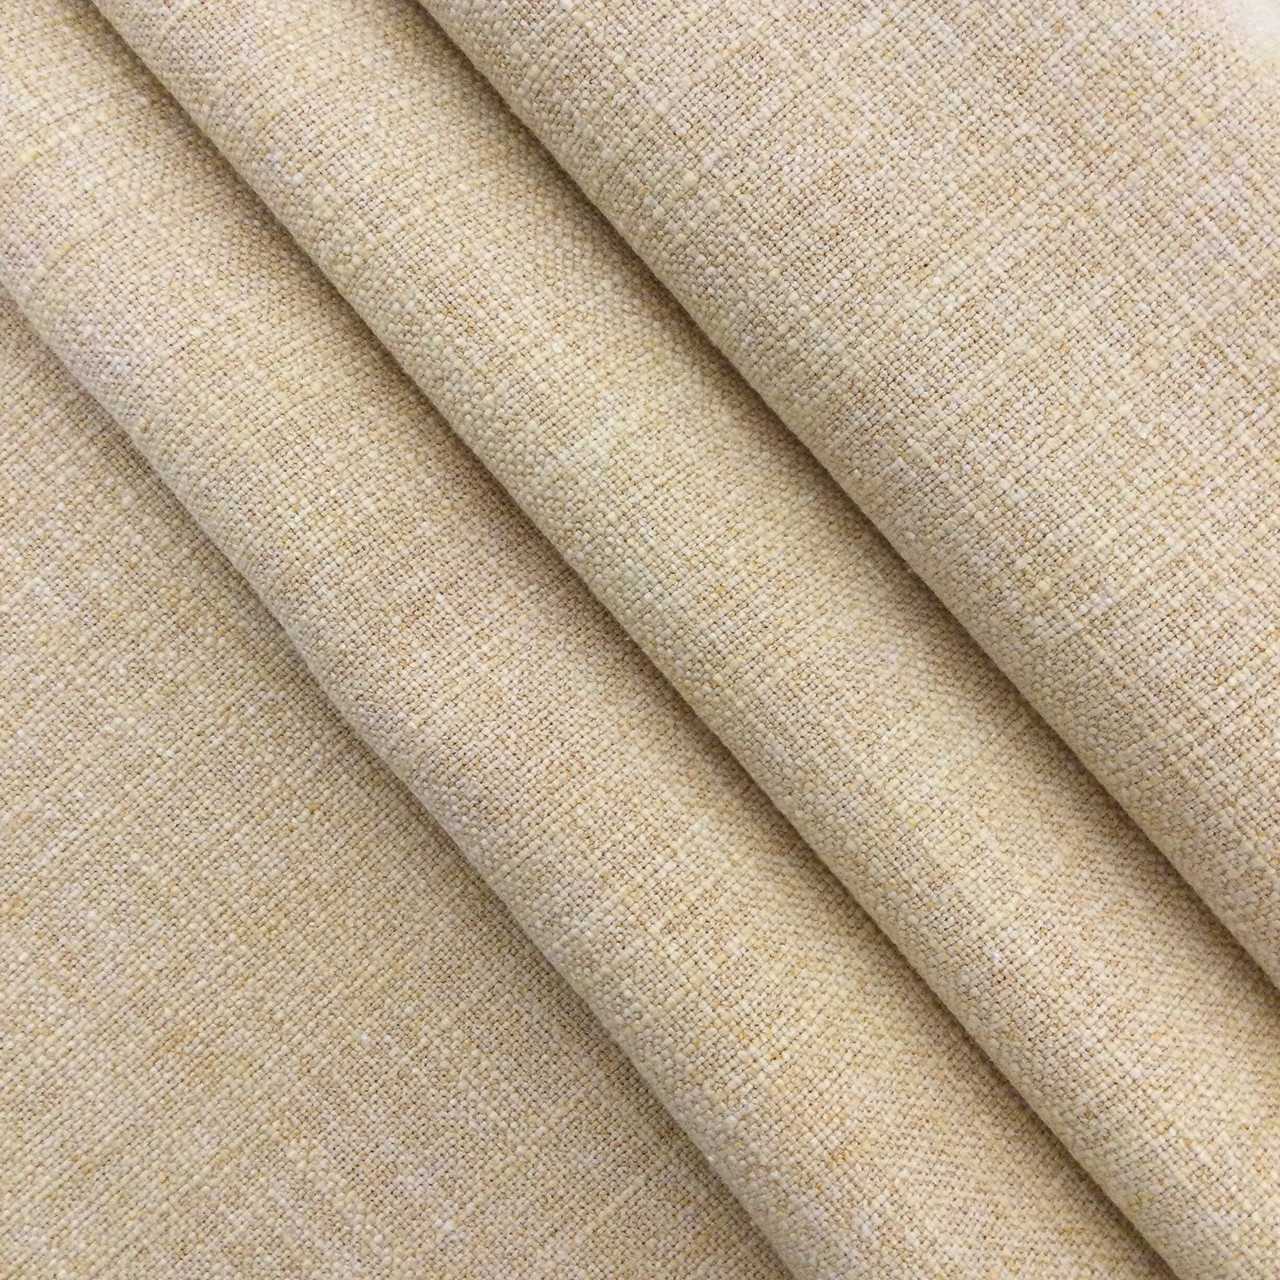 Linen Fabric Slub Weave in Mustard Yellow | Upholstery / Slipcovers /  Curtains | Poly / Cotton / Linen Blend | 55 Wide | By the Yard | Leslie  Jee